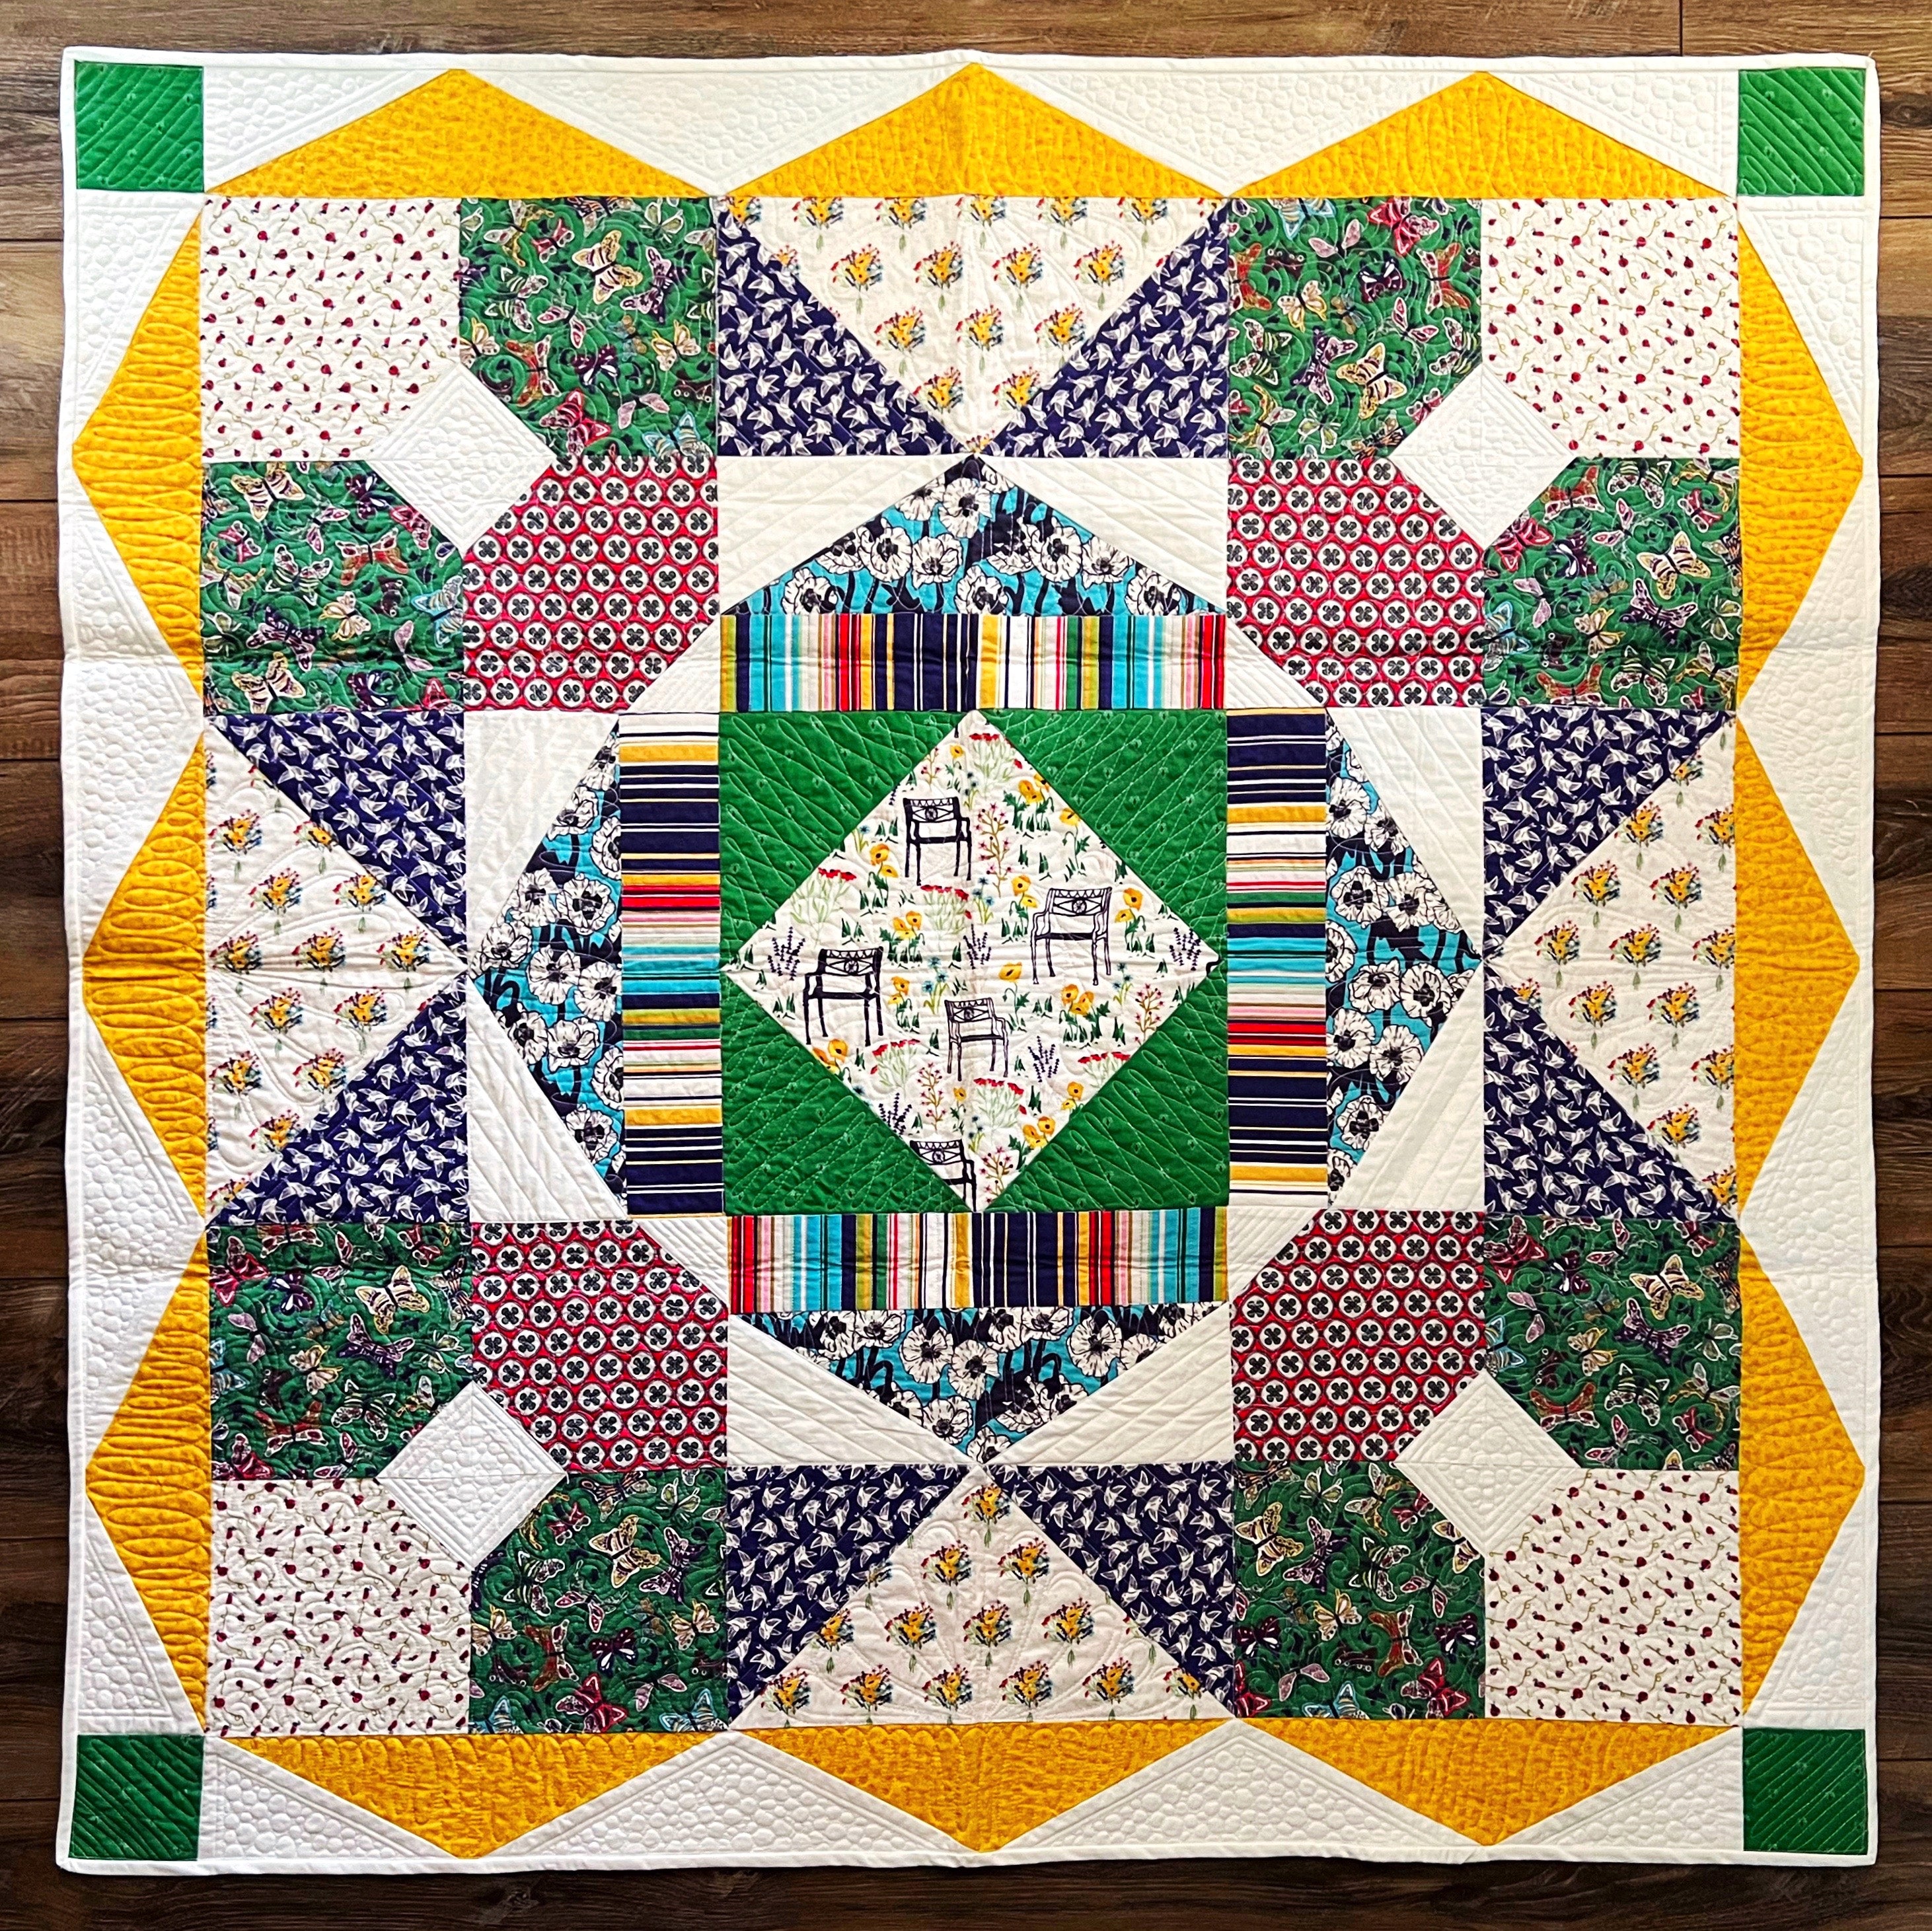 Kelly Renay's First Quilt, Backyard Meadow